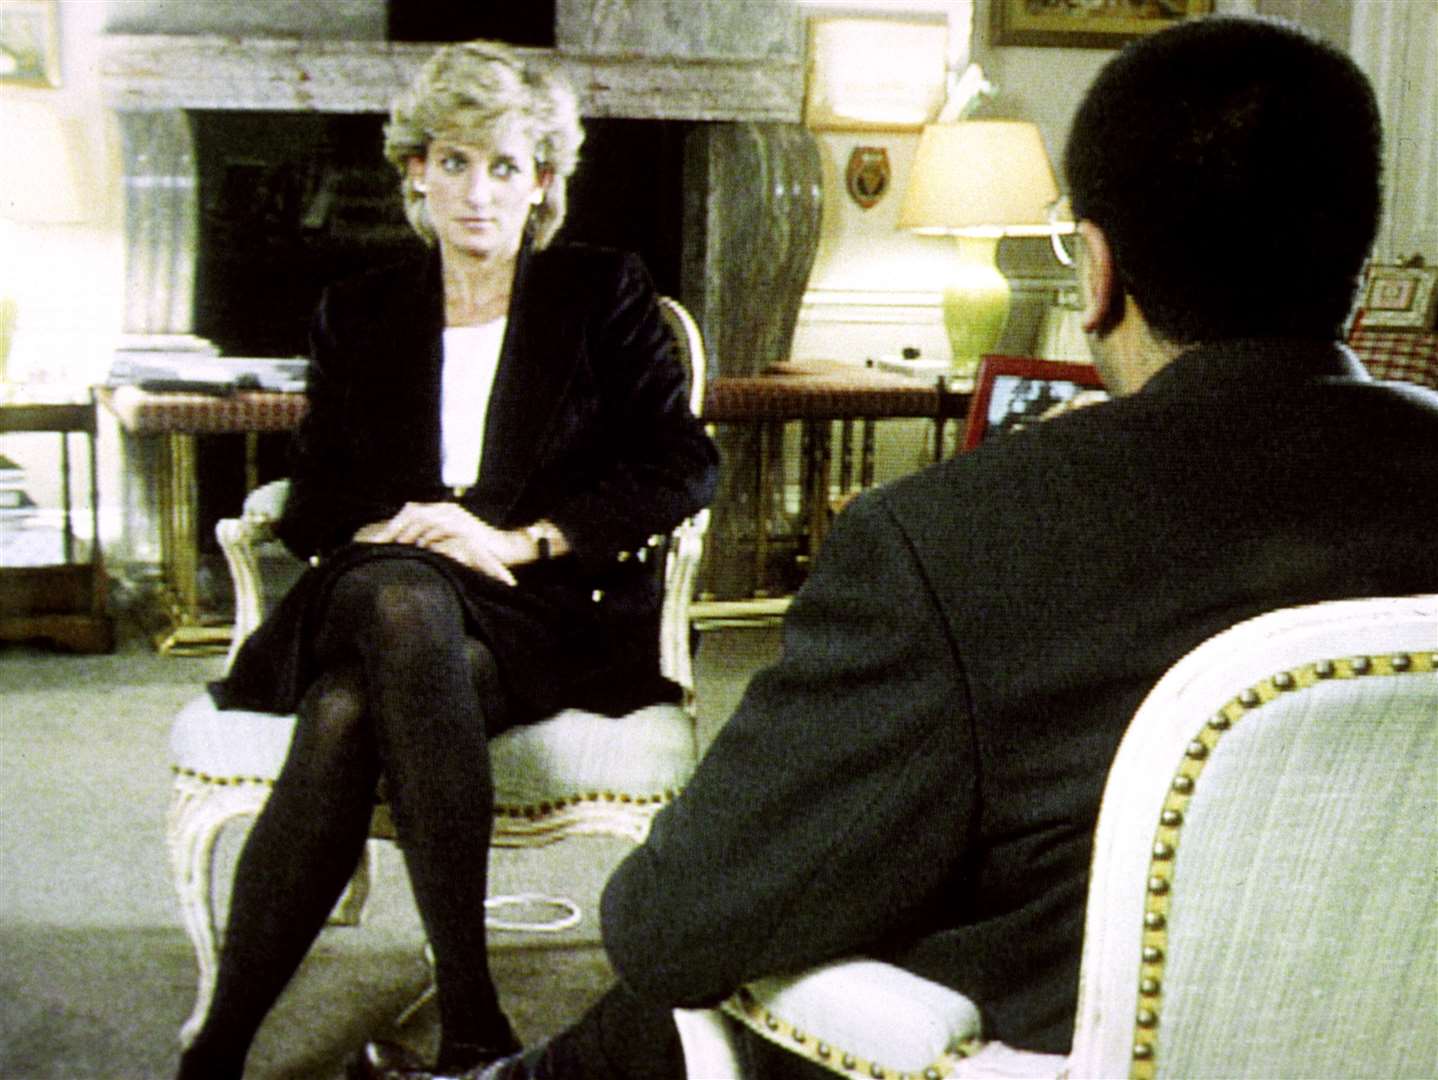 Diana during her interview with Martin Bashir (BBC)